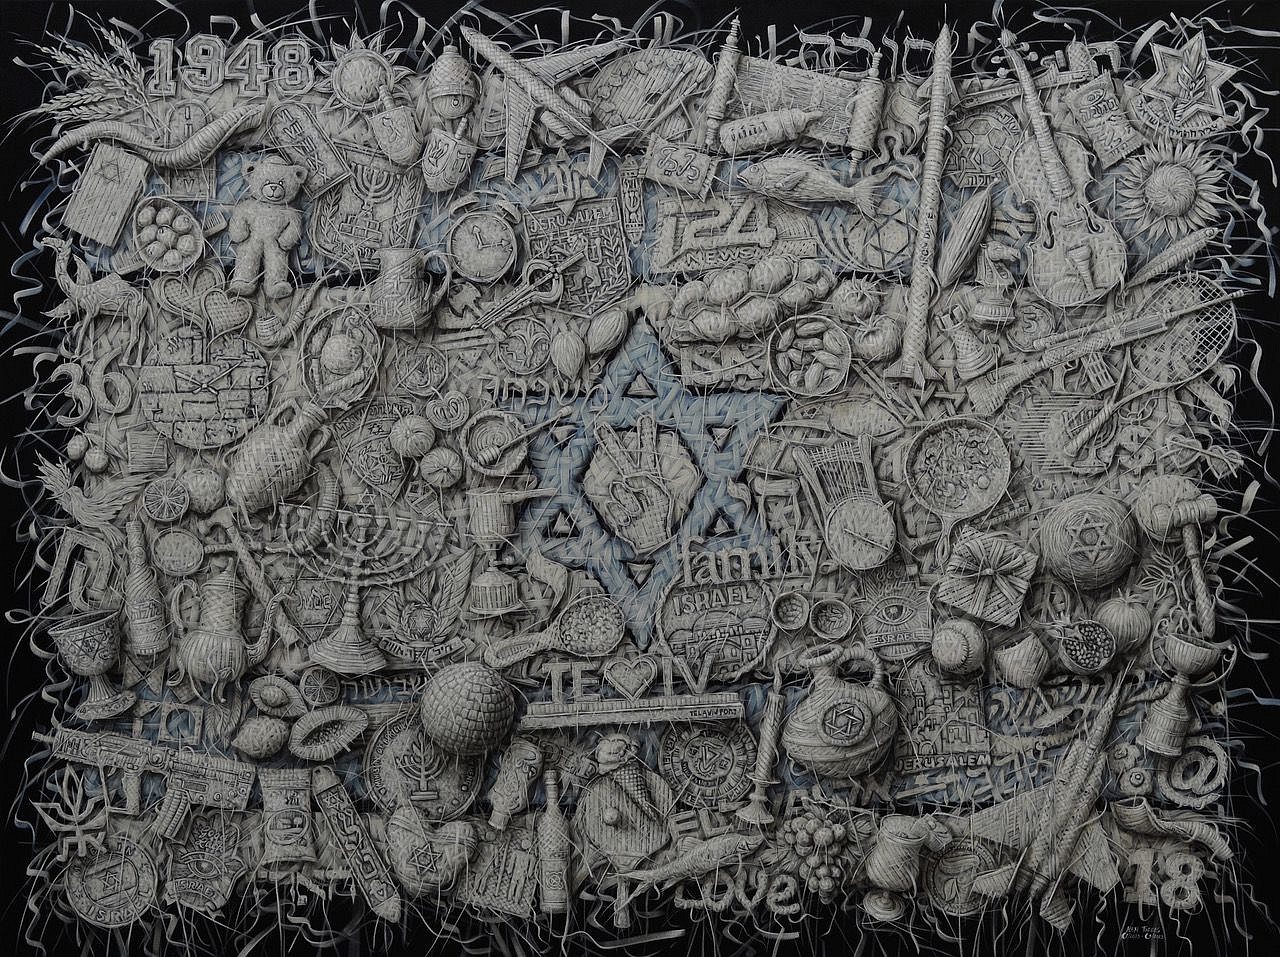 Alexi Torres, The Heart of Israel, 2023
Original Oil on Canvas, 72 x 96 in.